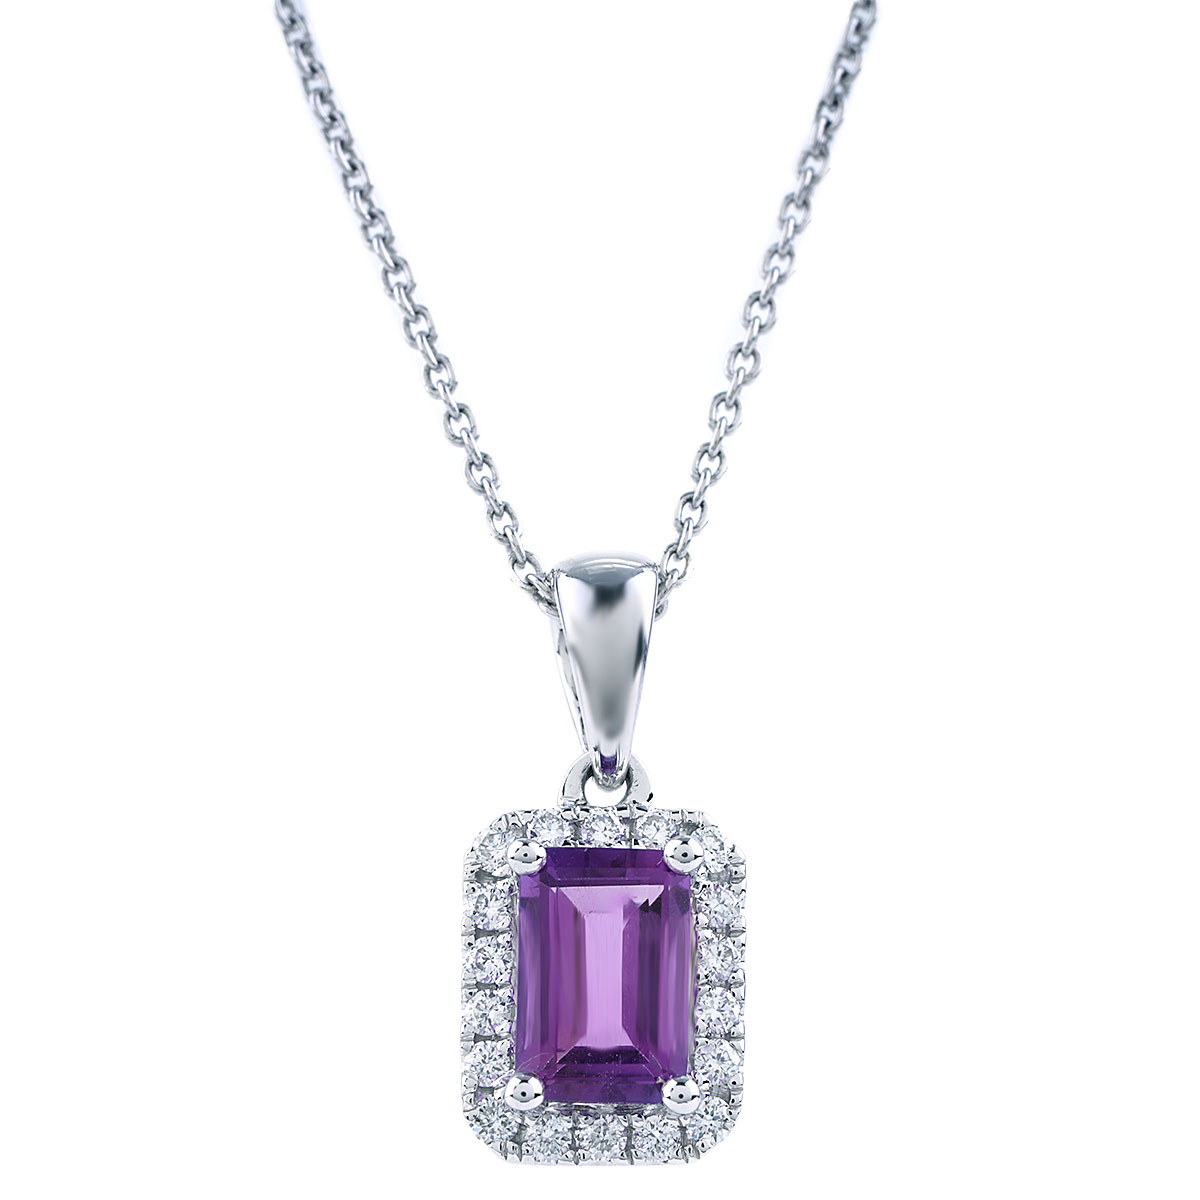 Silver pendant with details in gold, amethyst, emerald and diamonds.